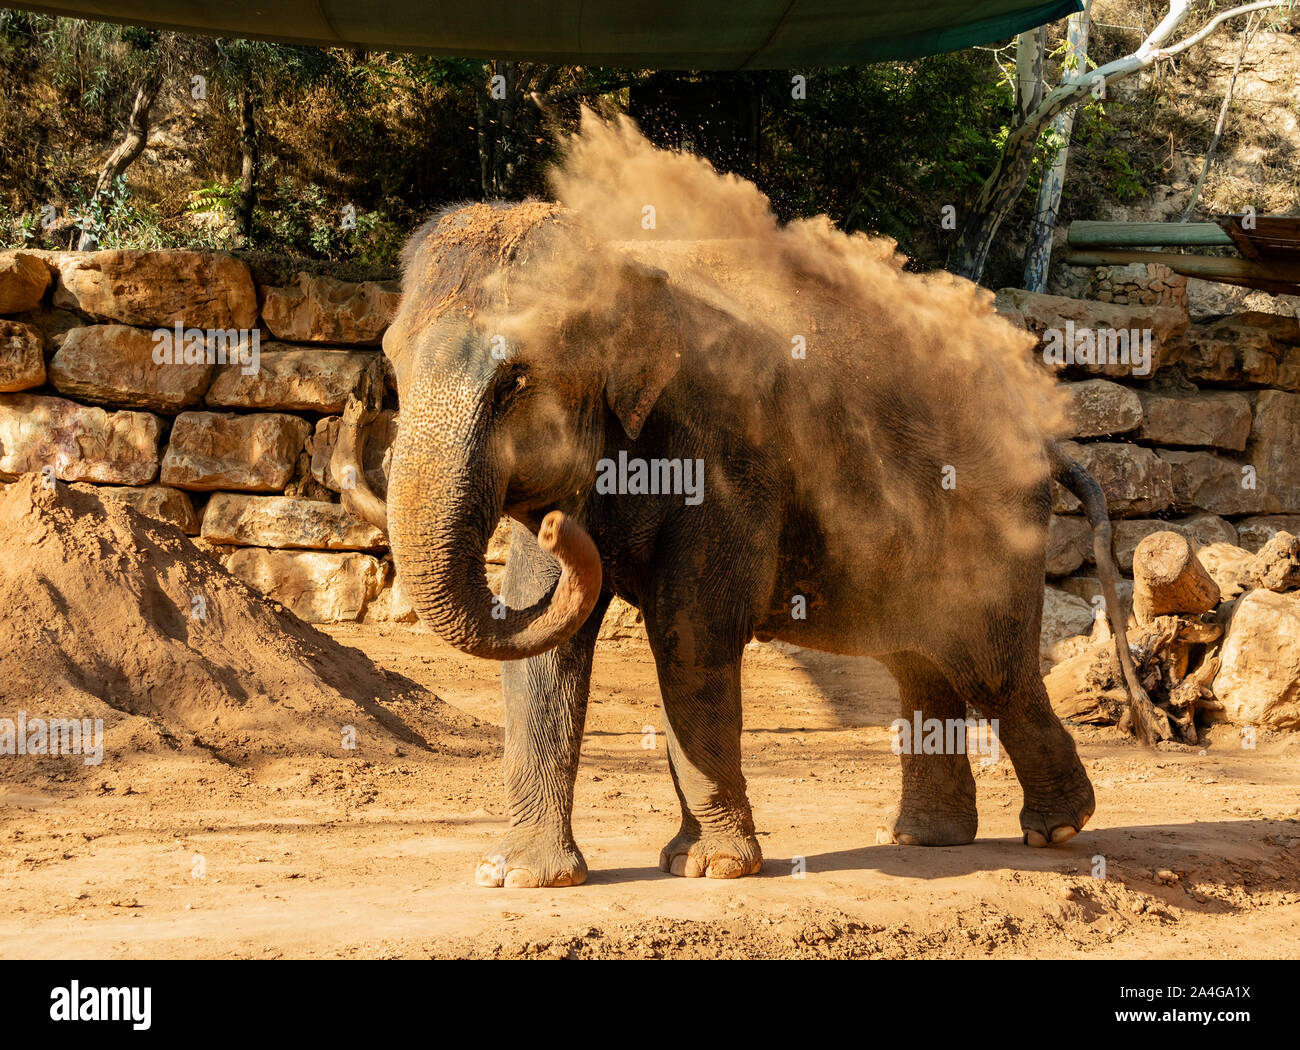 An elephant at the Jerusalem, Israel, zoo, taking a sand shower, using its trunk to spread sand all over itself Stock Photo